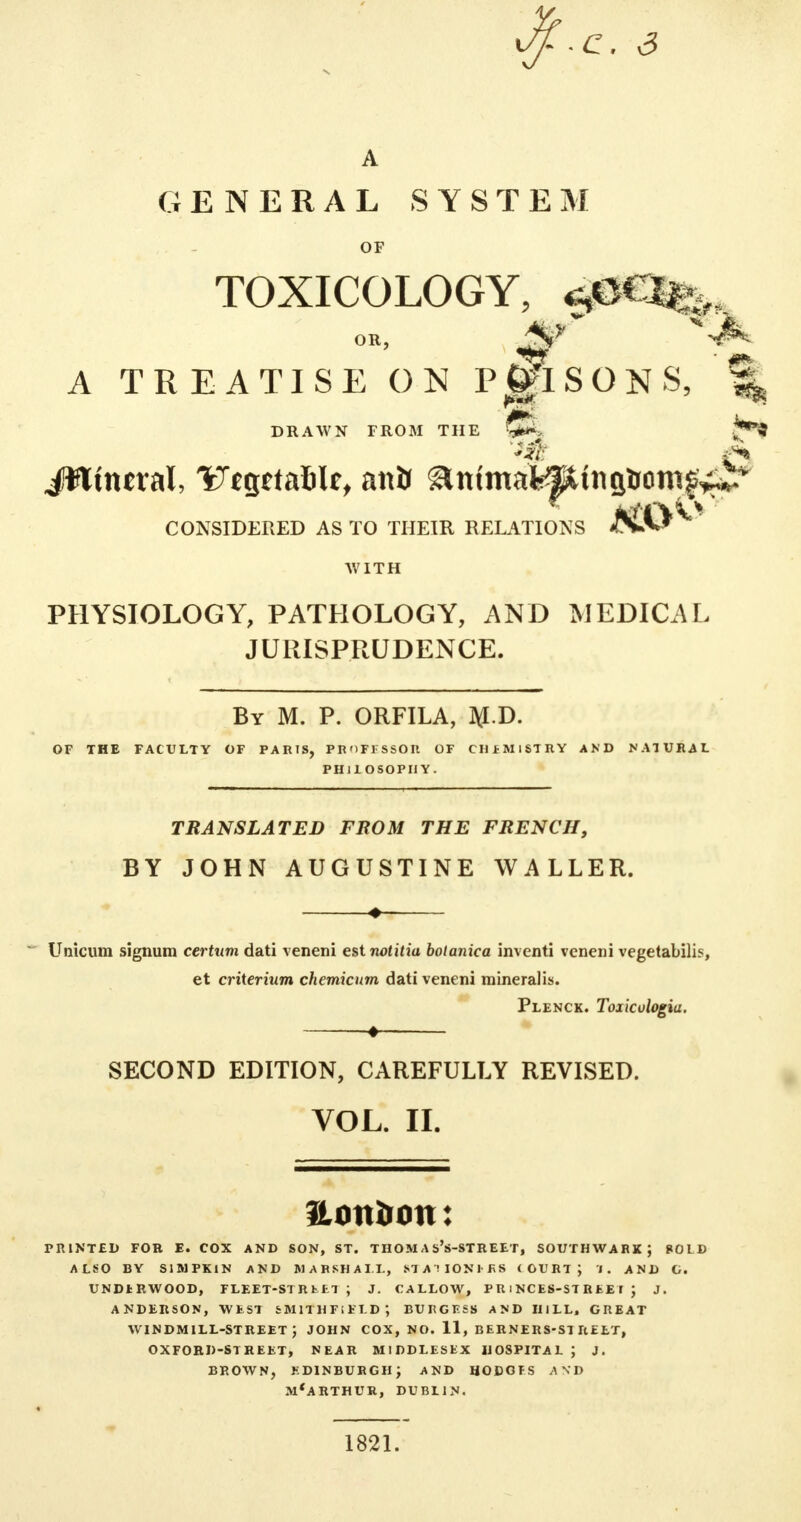 GENERAL SYSTEM OF TOXICOLOGY, OR, \V -J^ A TREATISE ON PRISONS, % mm DRAWN FROM THE JO CONSIDERED AS TO THEIR RELATIONS WITH PHYSIOLOGY, PATHOLOGY, AND MEDICAL JURISPPtUDENCE. By M. P. ORFILA, M.T>. OF THE FACULTY OF PARIS, PROFESSOR OF CHEMISTRY AND NATURAL PH1IOSOPIIY. TRANSLATED FROM THE FRENCH, BY JOHN AUGUSTINE WALLER. Unicum signum certxim dati veneni est notitia bolanica inventi veneni vegetabili?, et criterium chemicum dati veneni mineralis. Plenck. Toxiculogia, SECOND EDITION, CAREFULLY REVISED. VOL. II. Hon&on: PRINTED FOR E. COX AND SON, ST. THOM A s's-STREET, SOUTHWABK; SOLD ALSO BY S1MPK1N AND MARSHALL, STAUOZORS (OURTJ I. AND C. UNDt RWOOD, FLEET-ST R fc El ; J. CALLOW, P R i NCES-ST R EE I J J. ANDERSON, WEST SMITHFiELD; BUKCESS AND HILL, GREAT windmill-street; JOHN cox, no. 11, berners-si reet, OXFORD-STREET, NEAR MIDDLESEX HOSPITAL J J. BROWN, EDINBURGH; AND HODGES AND M'ARTHUR, DUBLIN. 1821.